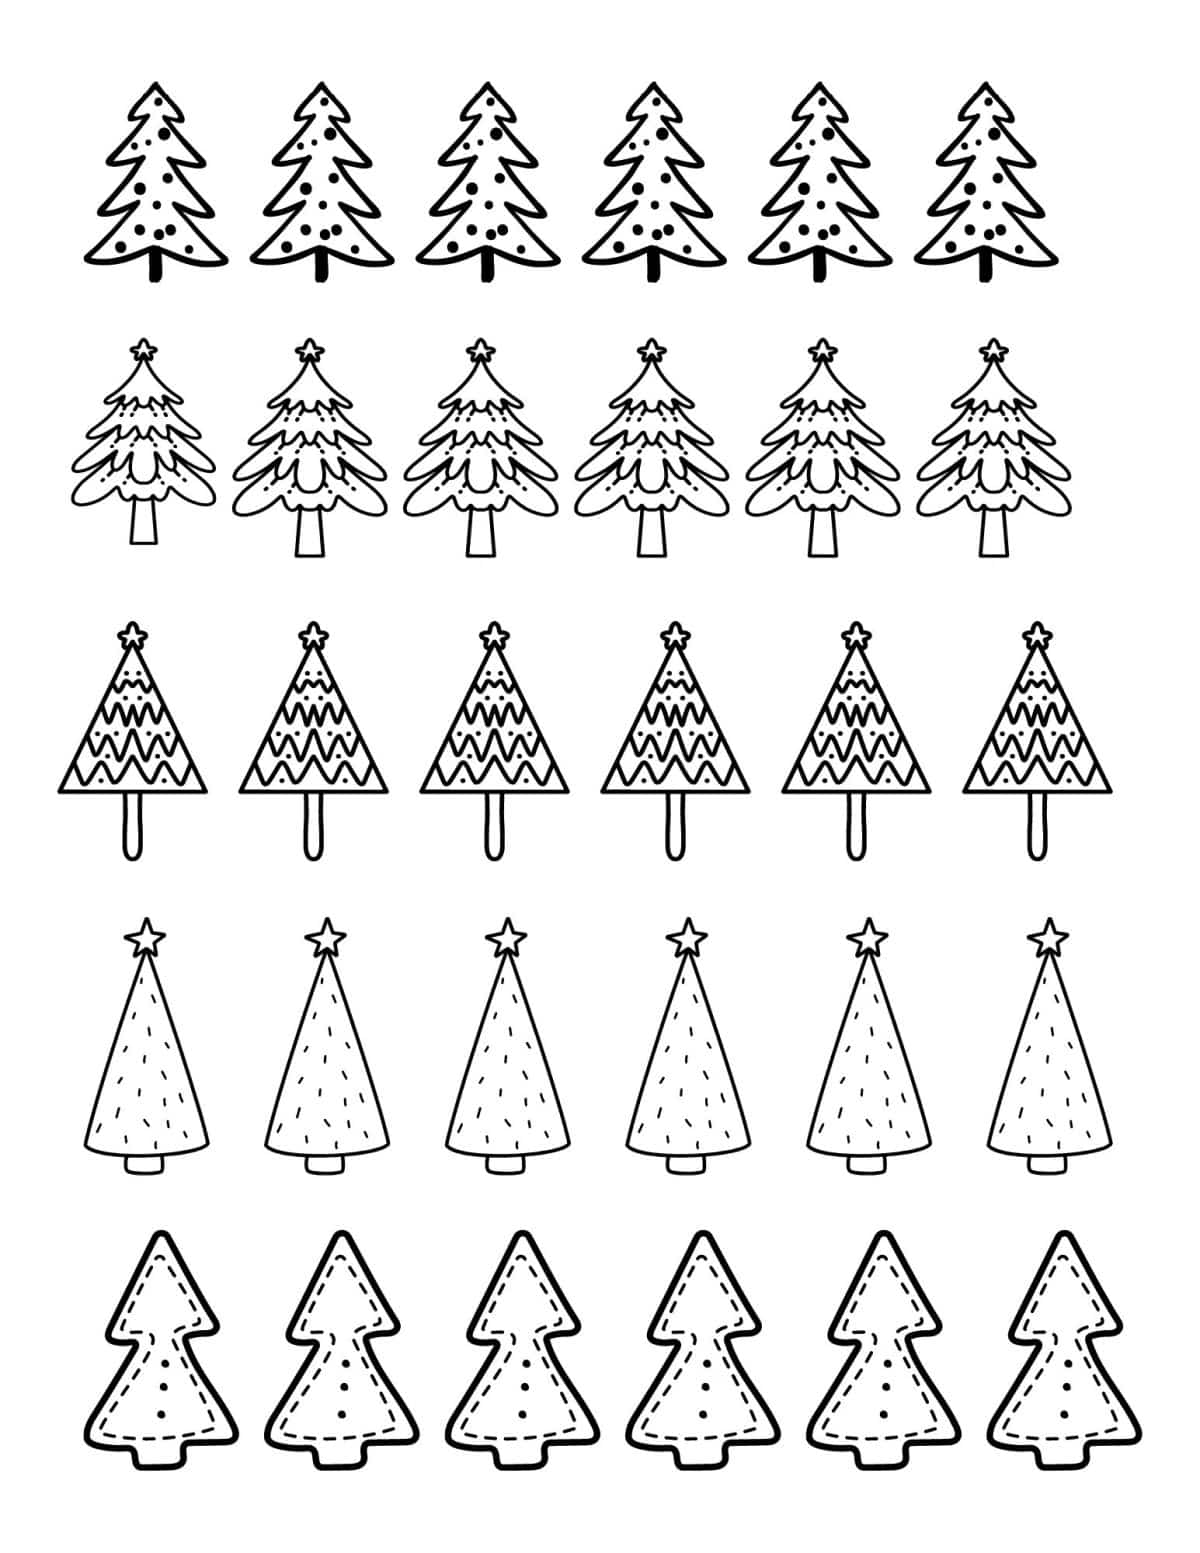 Coloring page full of rows of Christmas trees